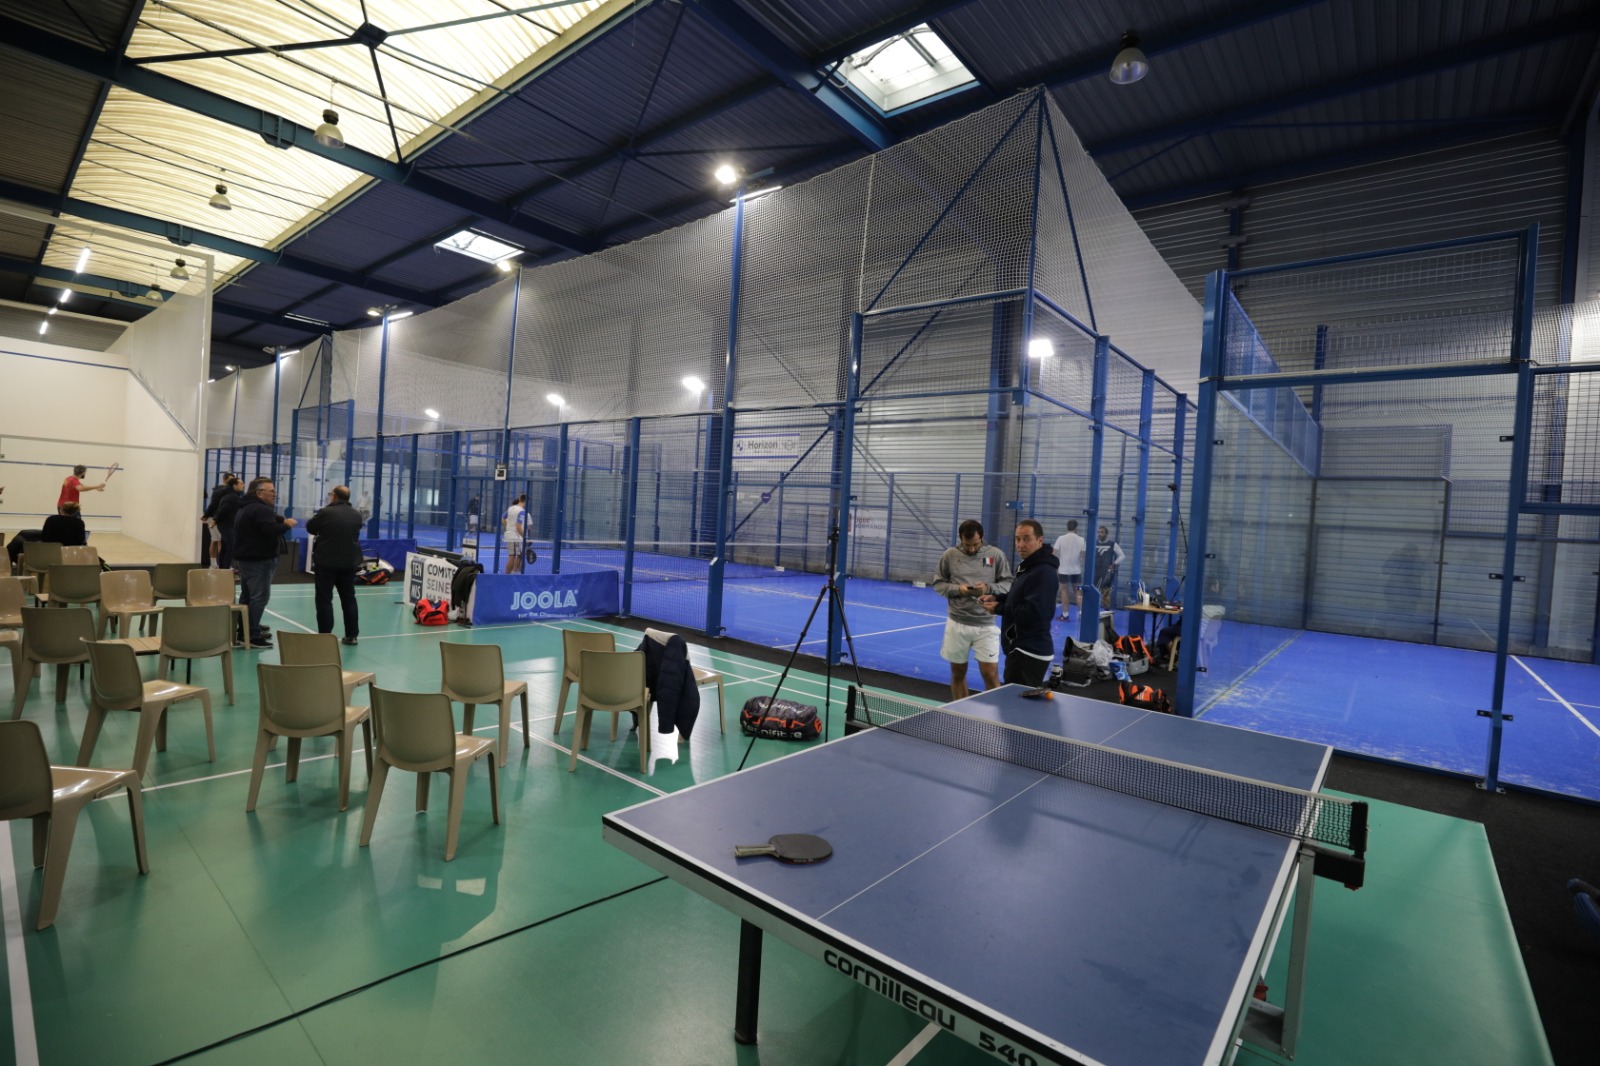 The Open Padel Arena to follow live!